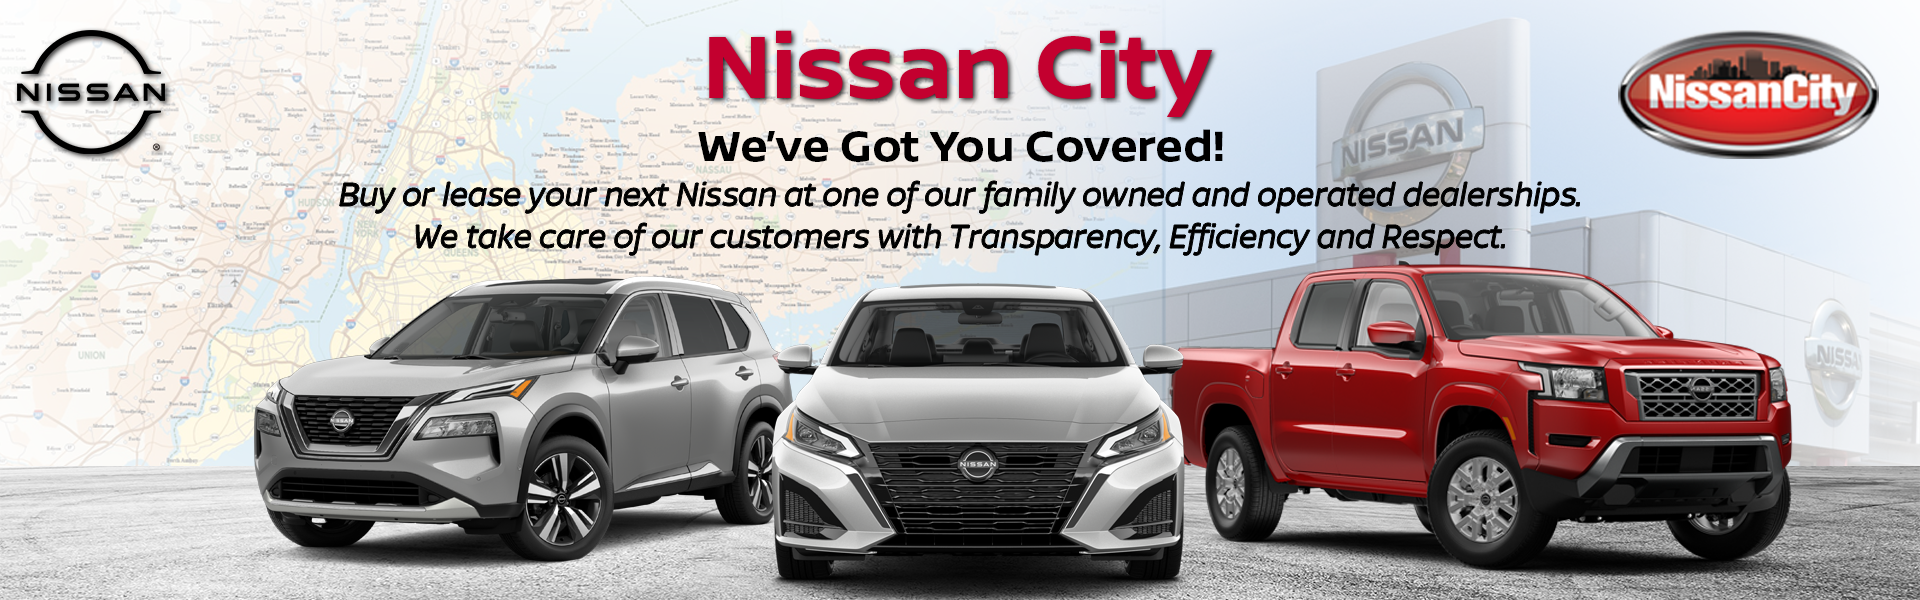 Nissan City - We've Got You Covered in Springfield, NJ